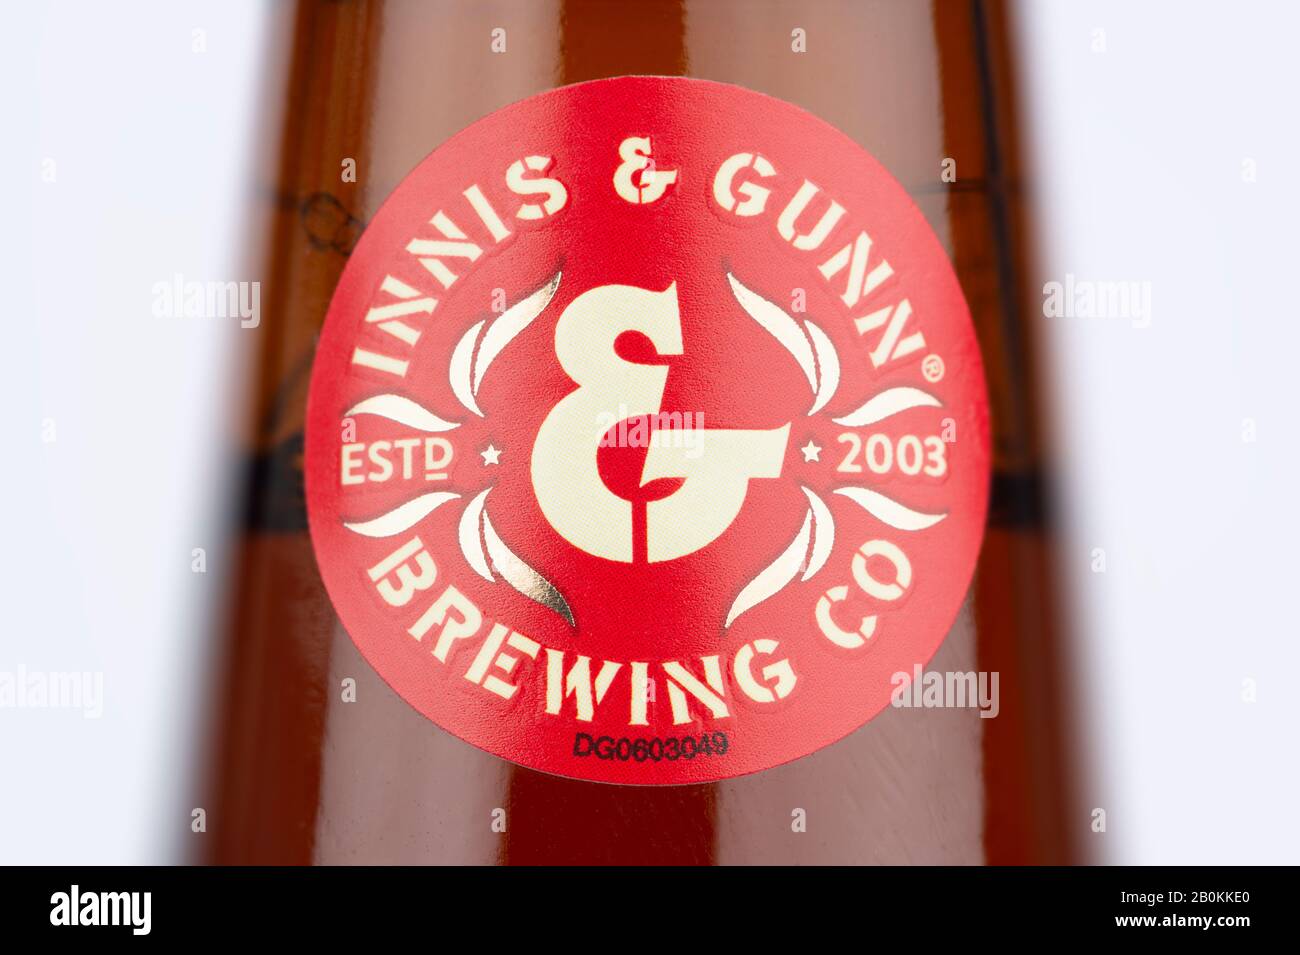 A close up of the brand logo as seen on a bottle of Innis & Gunn bourbon barrel scotch ale shot on a white background. Stock Photo